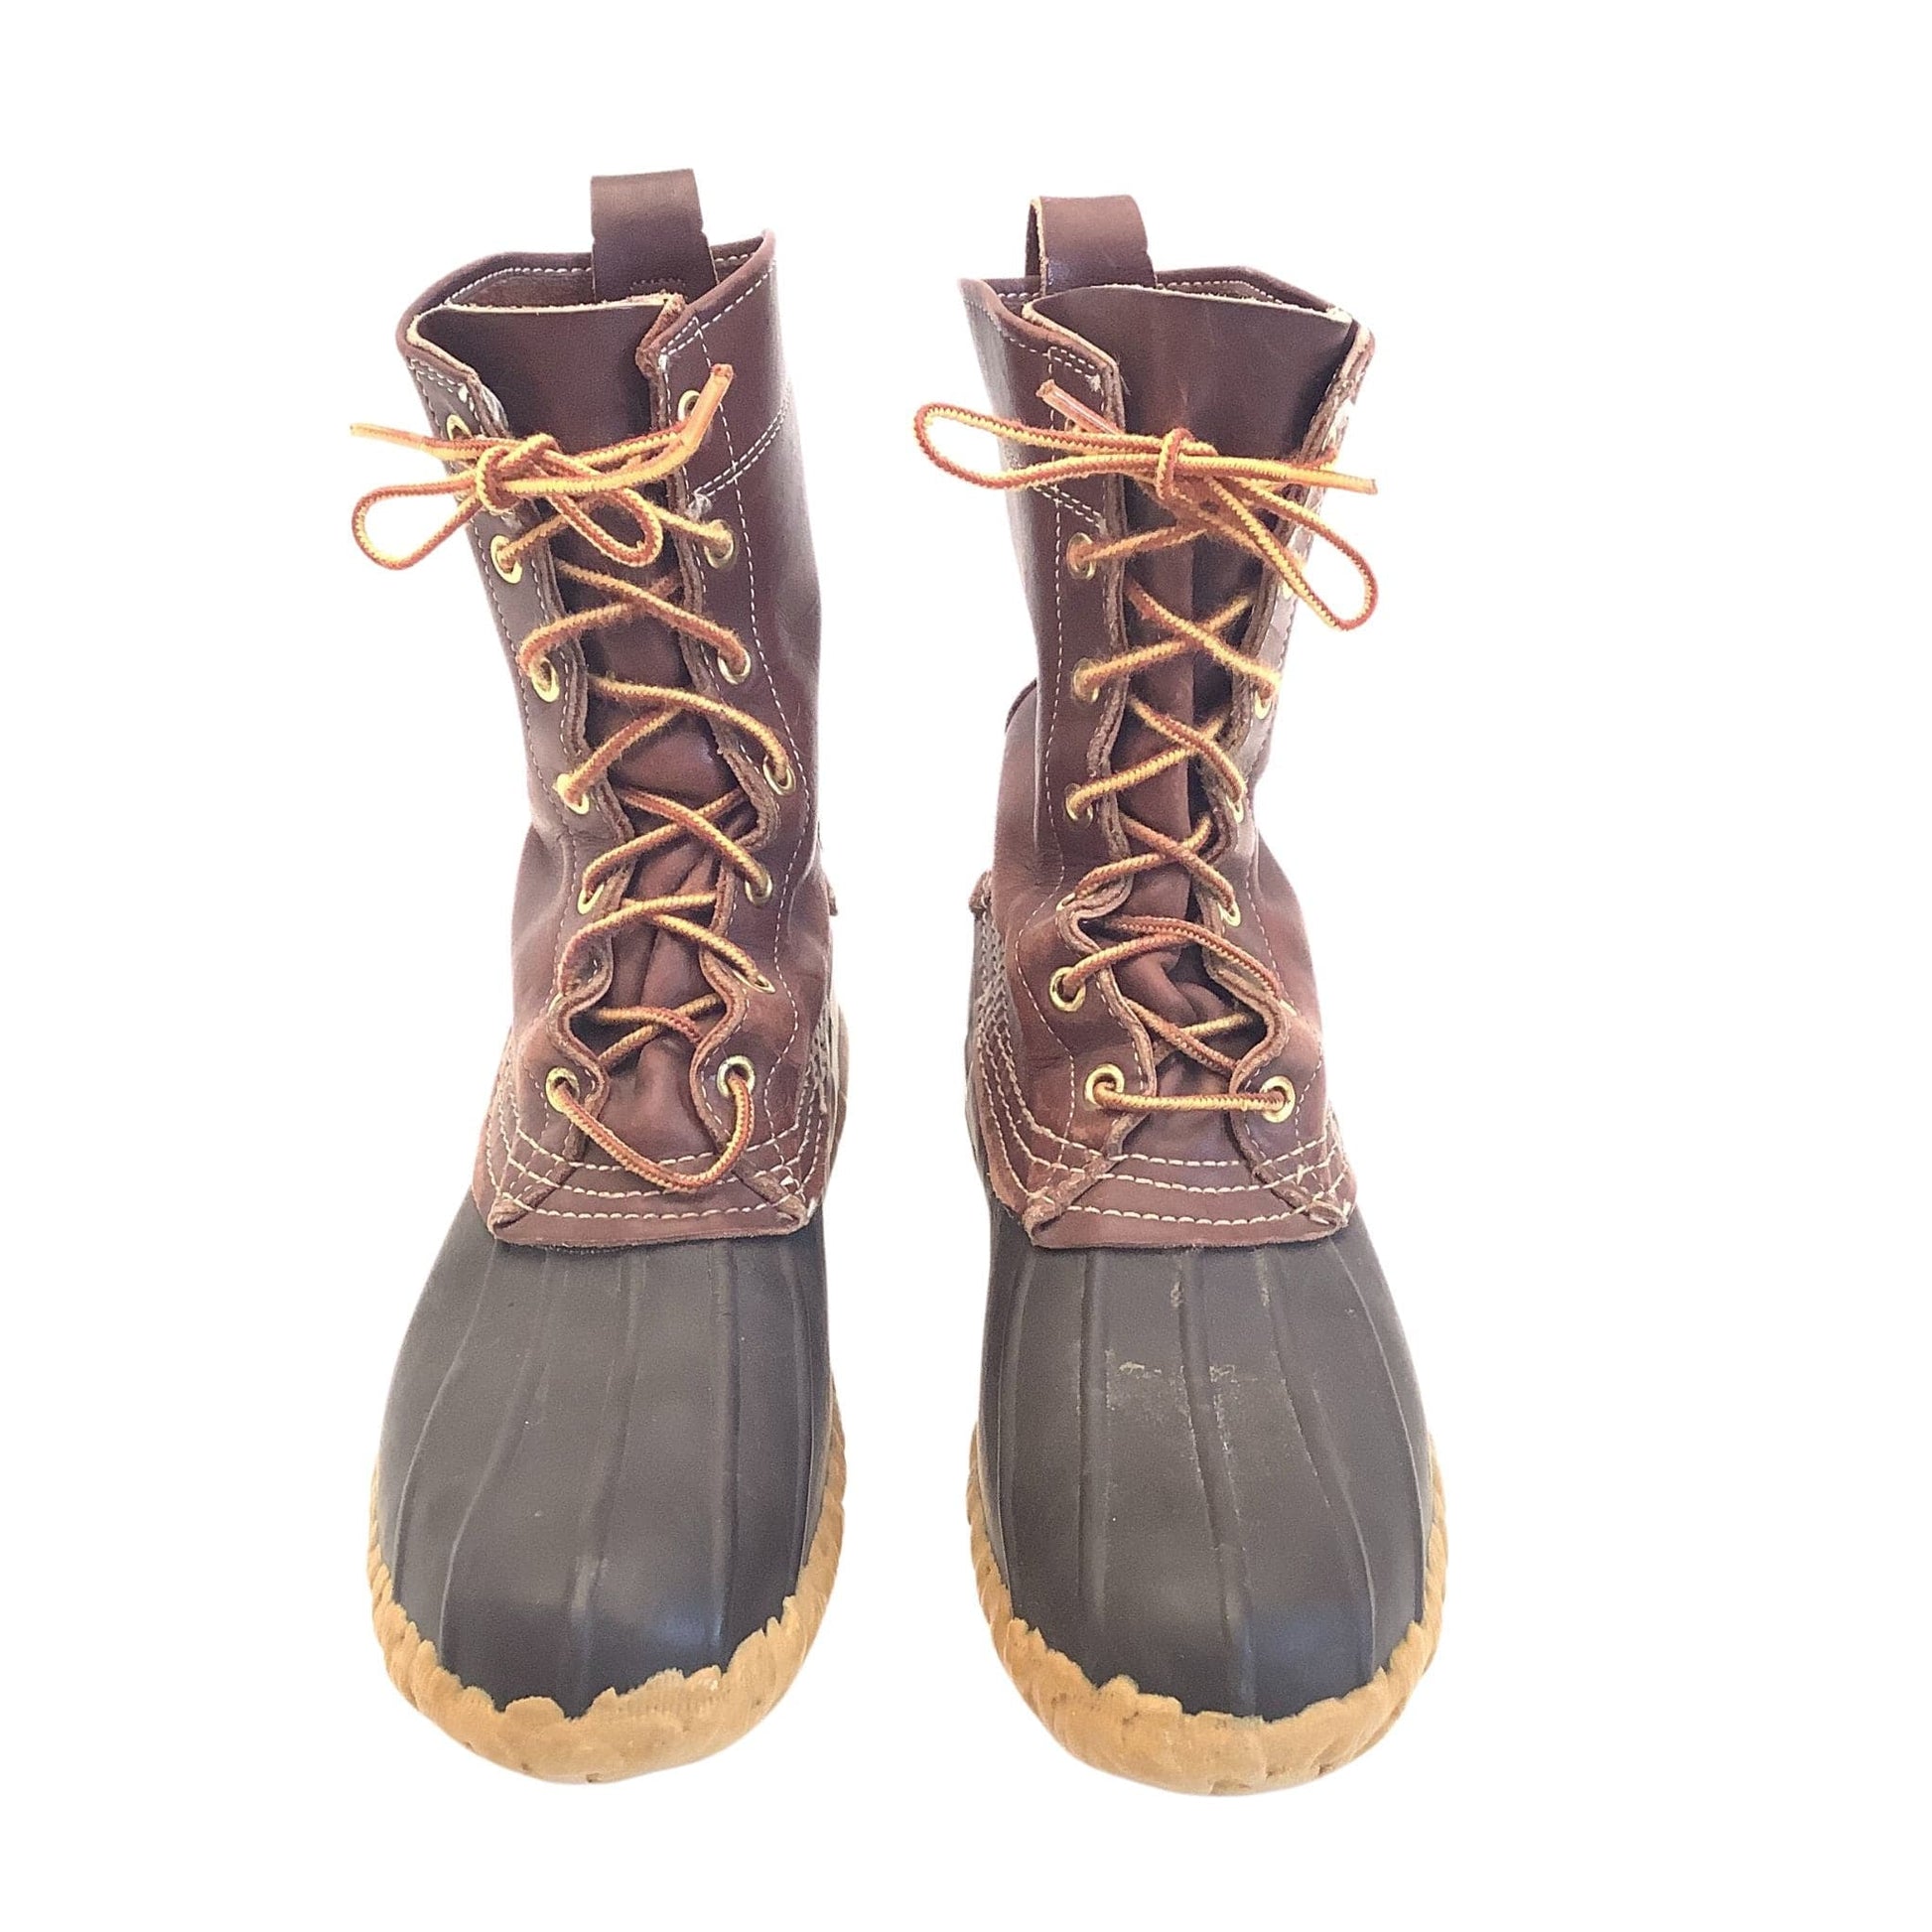 LL Bean Rubber Boots 8 / Mixed / Vintage 1990s